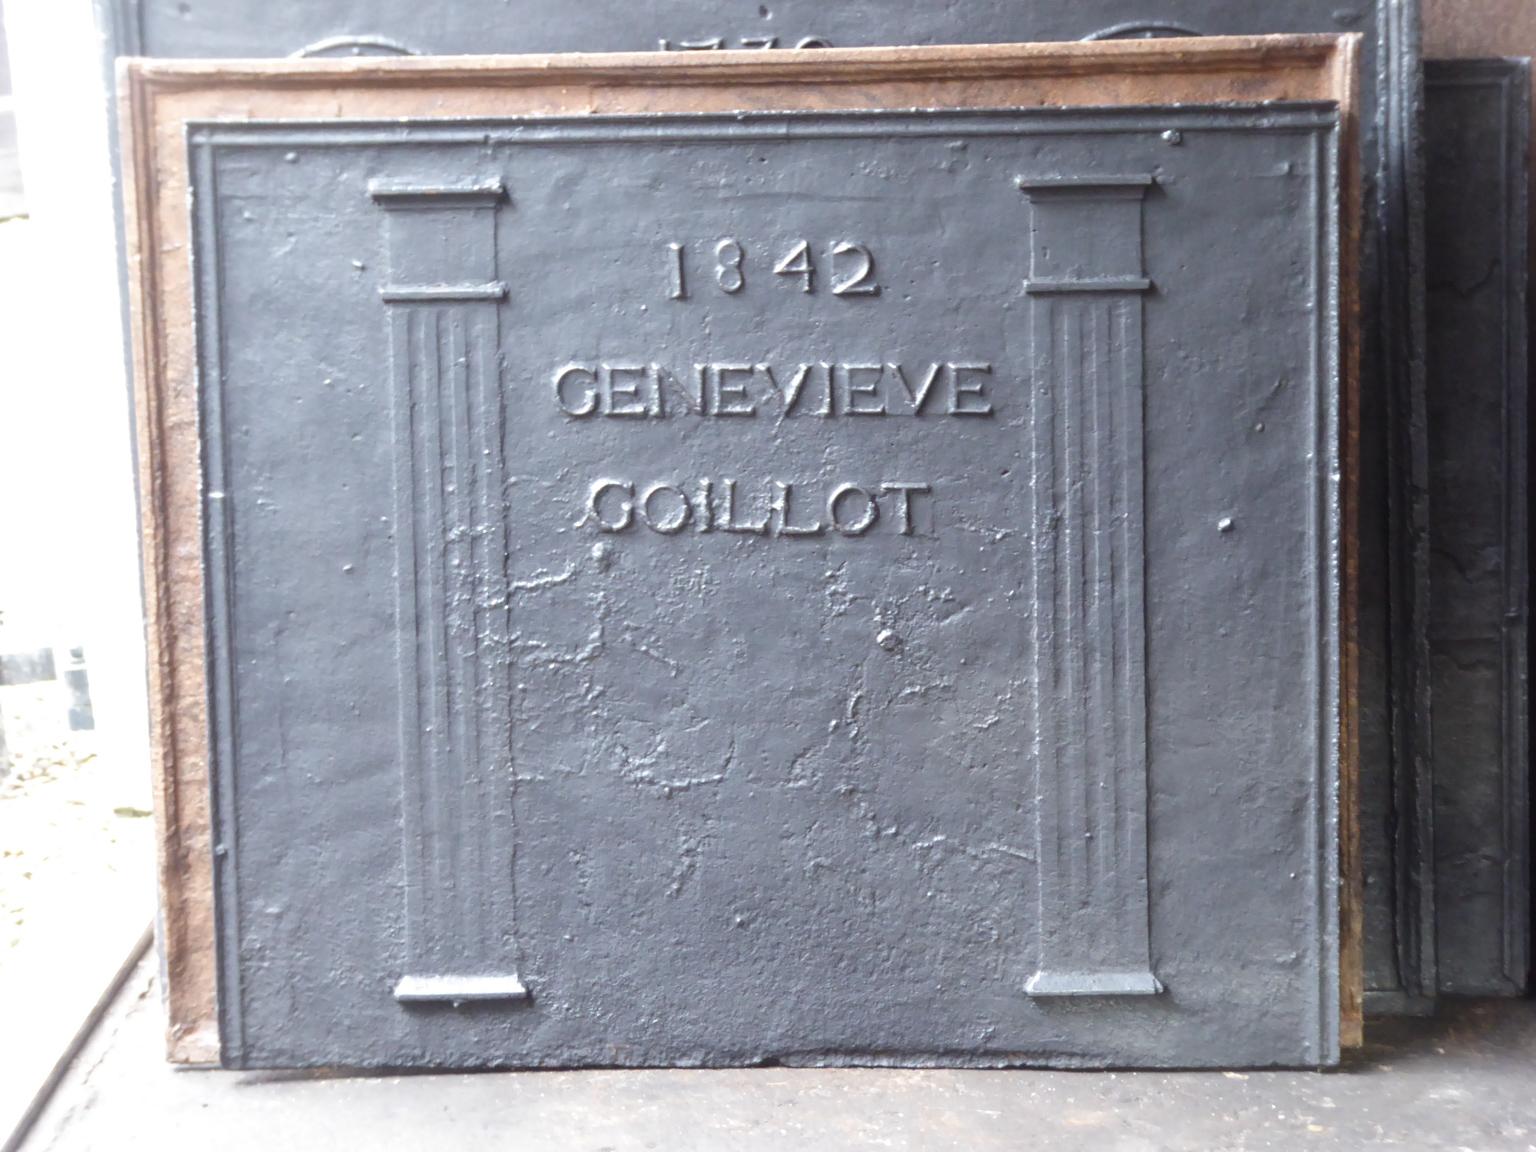 19th century French neoclassical fireback with two pillars of freedom. The pillars symbolize the value liberty, one of the three values of the French revolution. The date of production of the fireback, 1842, is also cast in the fireback

The